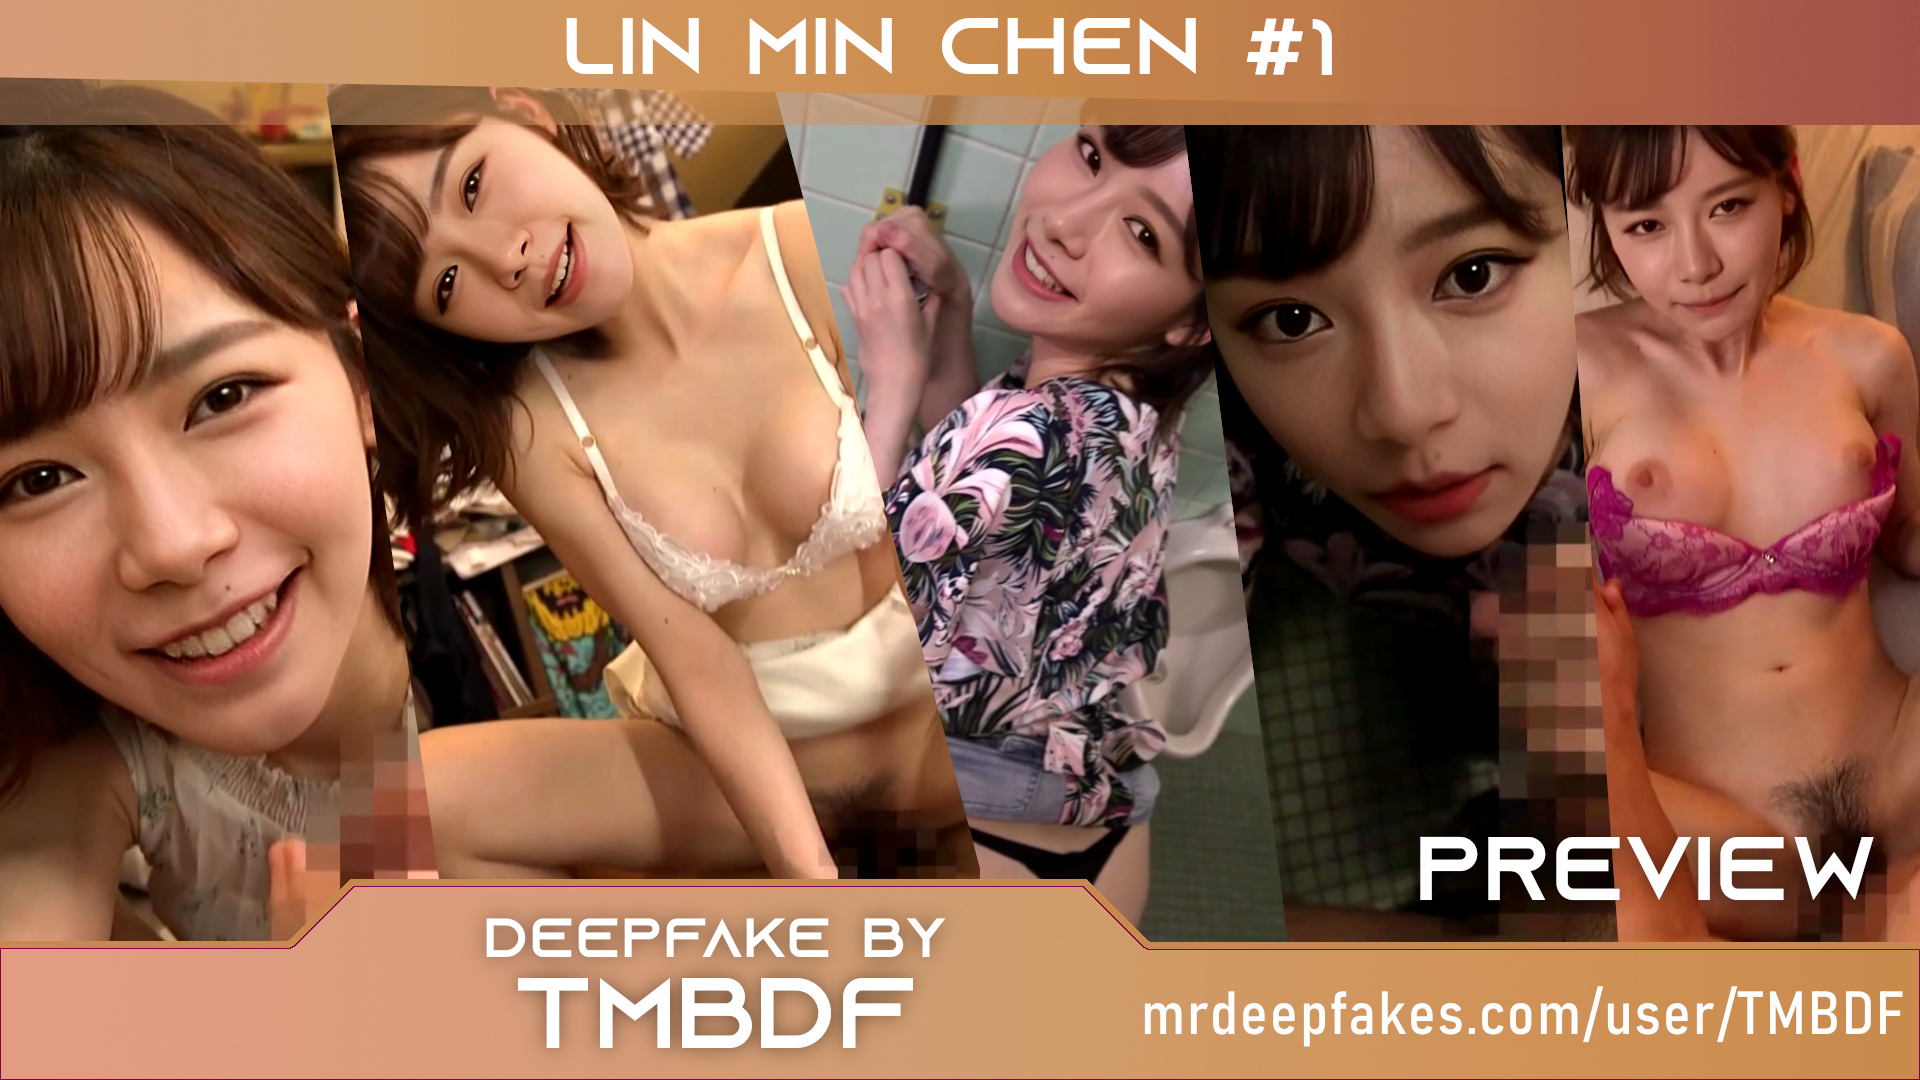 Chen - Not Lin Min Chen invities you for a whole day of fucking (preview - 47:40)  #1 DeepFake Porn - MrDeepFakes